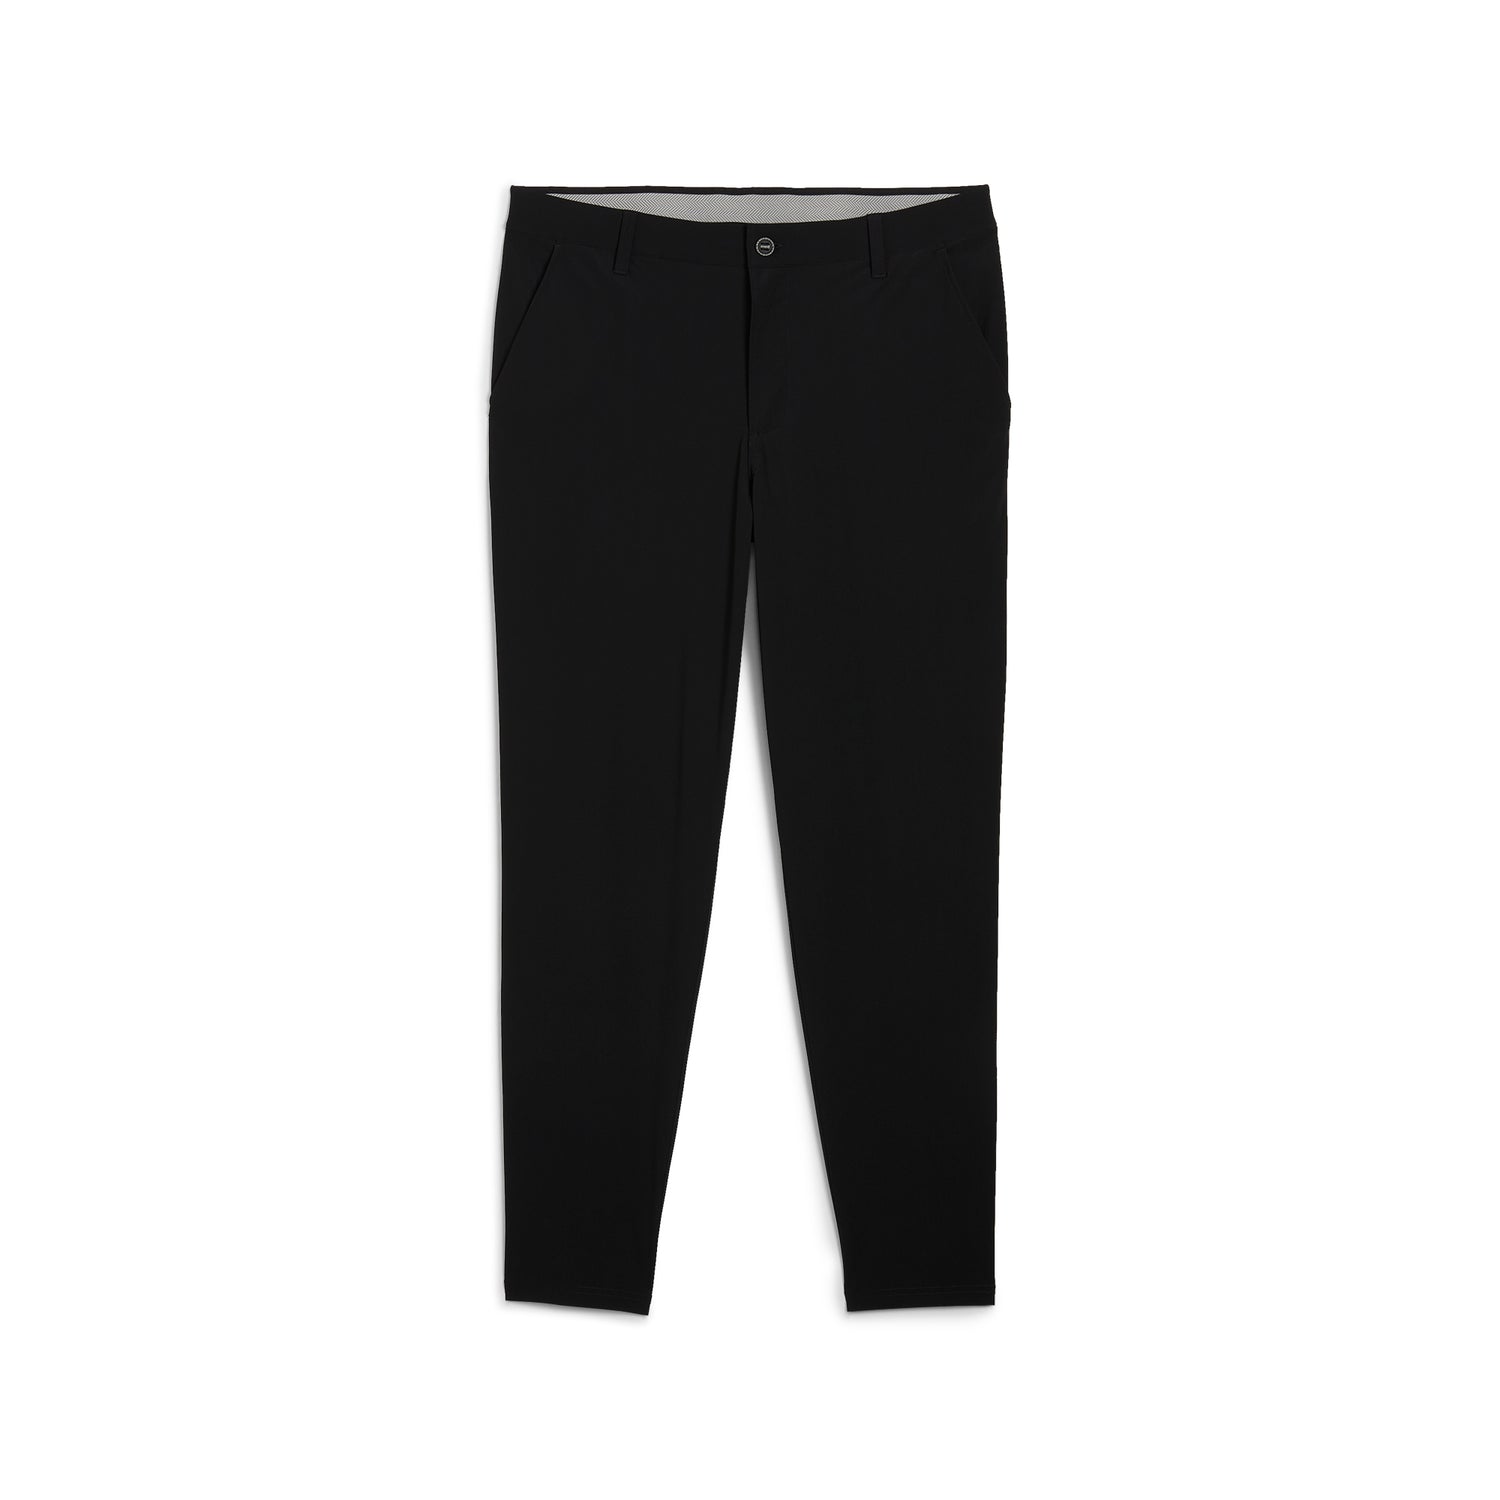 In Motion Golf Pant (Black) - New Dimensions Active - Golf Trousers